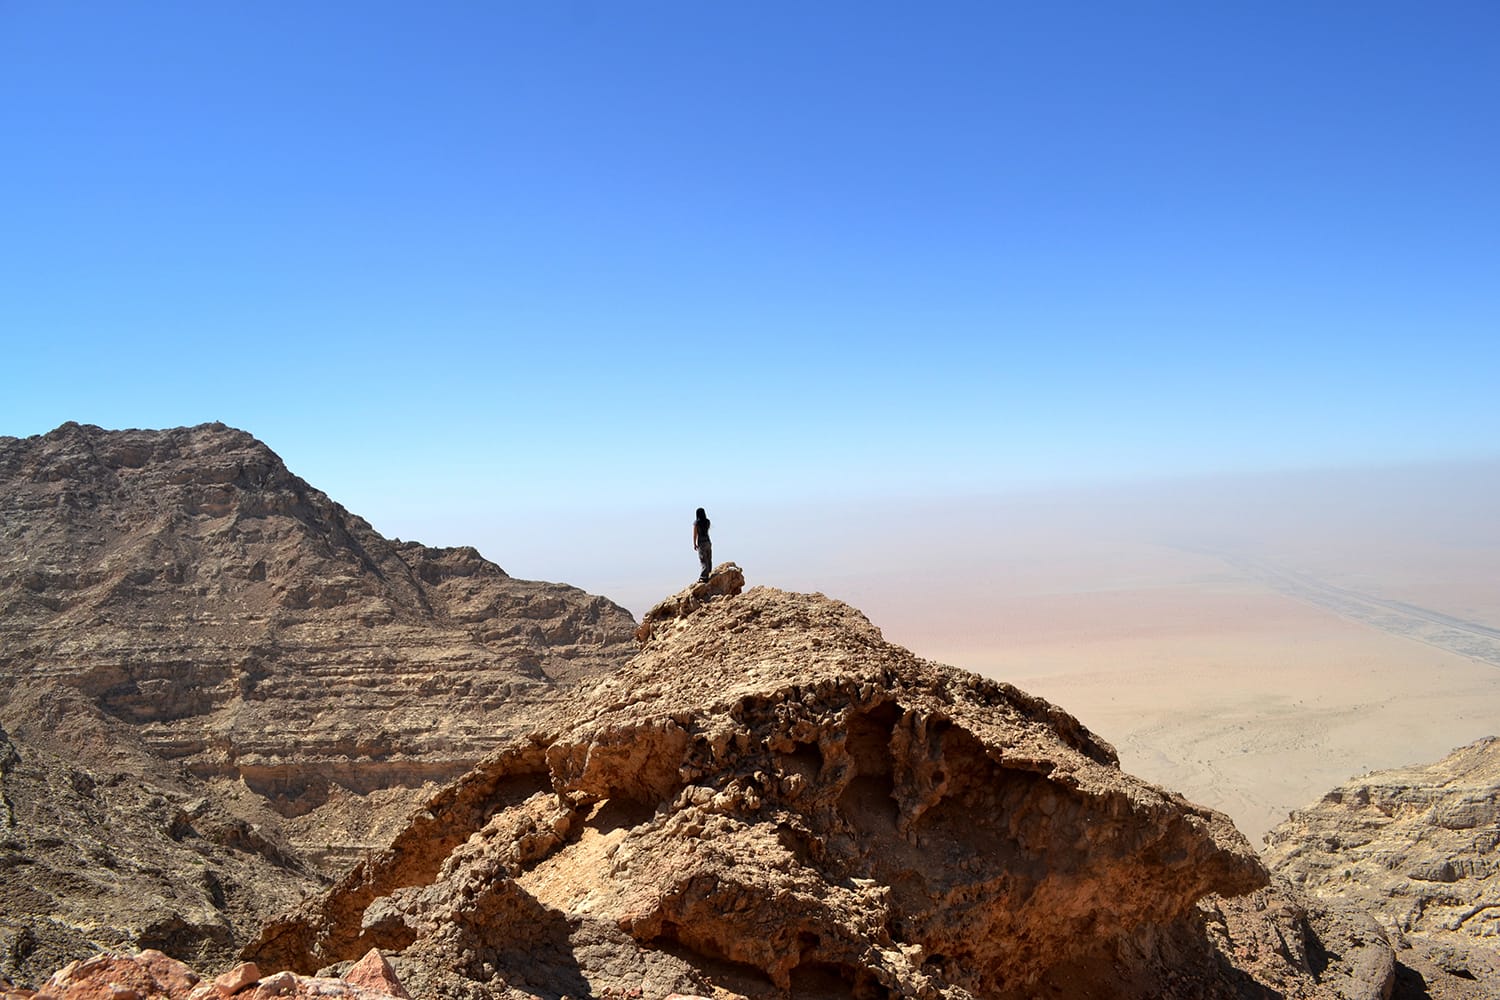 Panoramic view from the high mountains of Jebel Hafeet, United Arab Emirates